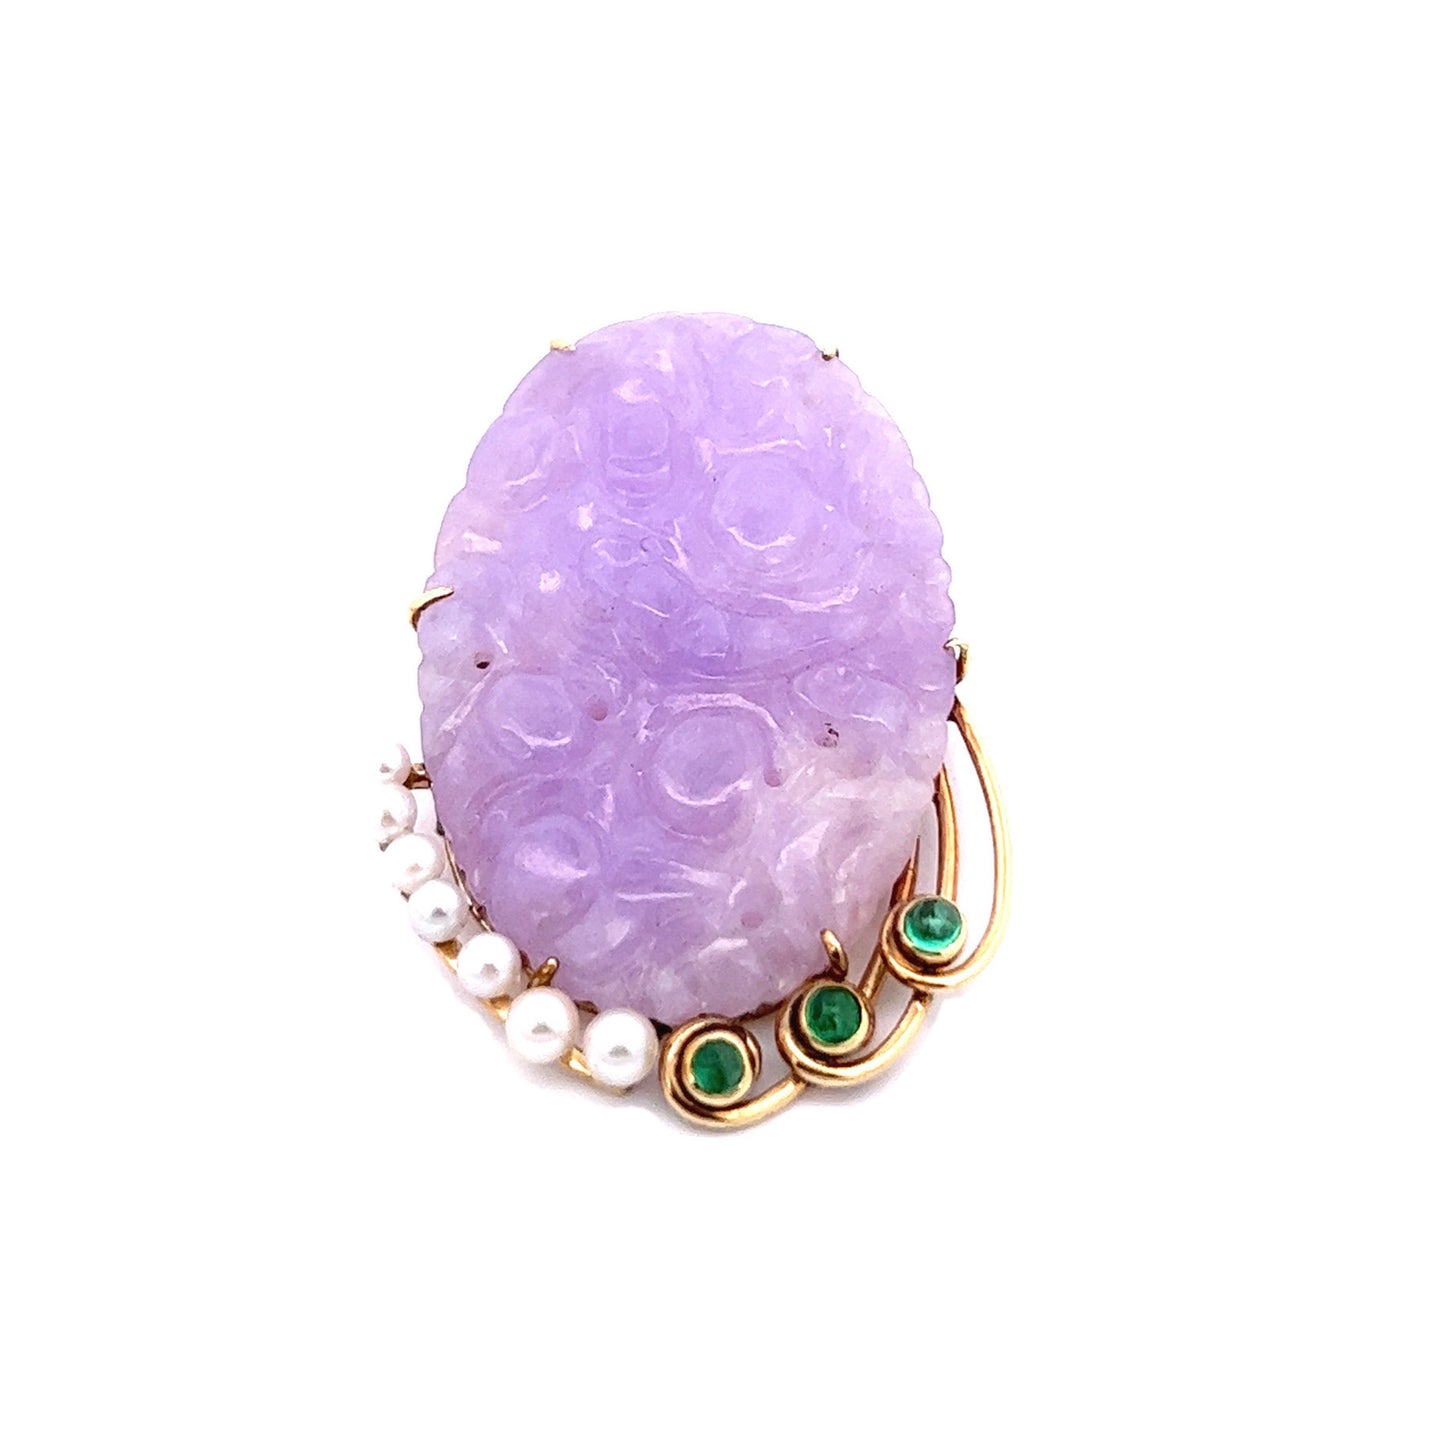 1960s 18KT Yellow Gold Lavender Jade & Emerald Brooch front view